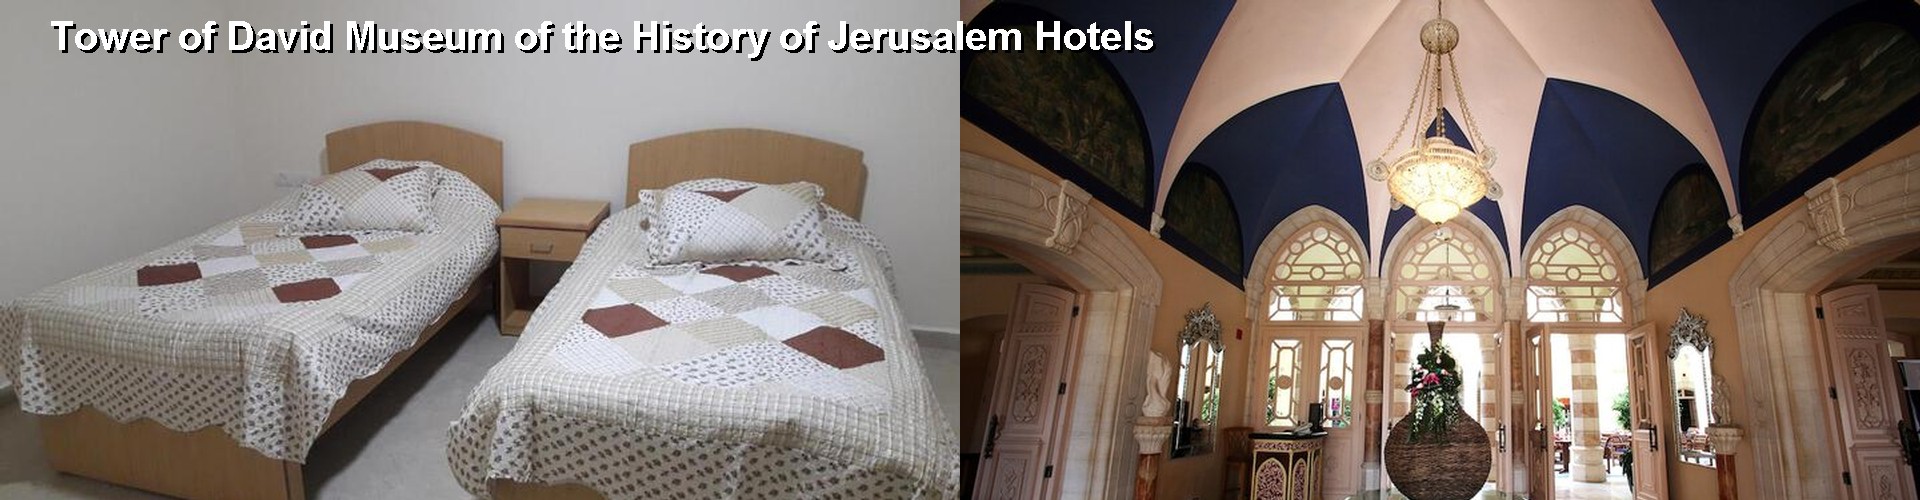 5 Best Hotels near Tower of David Museum of the History of Jerusalem